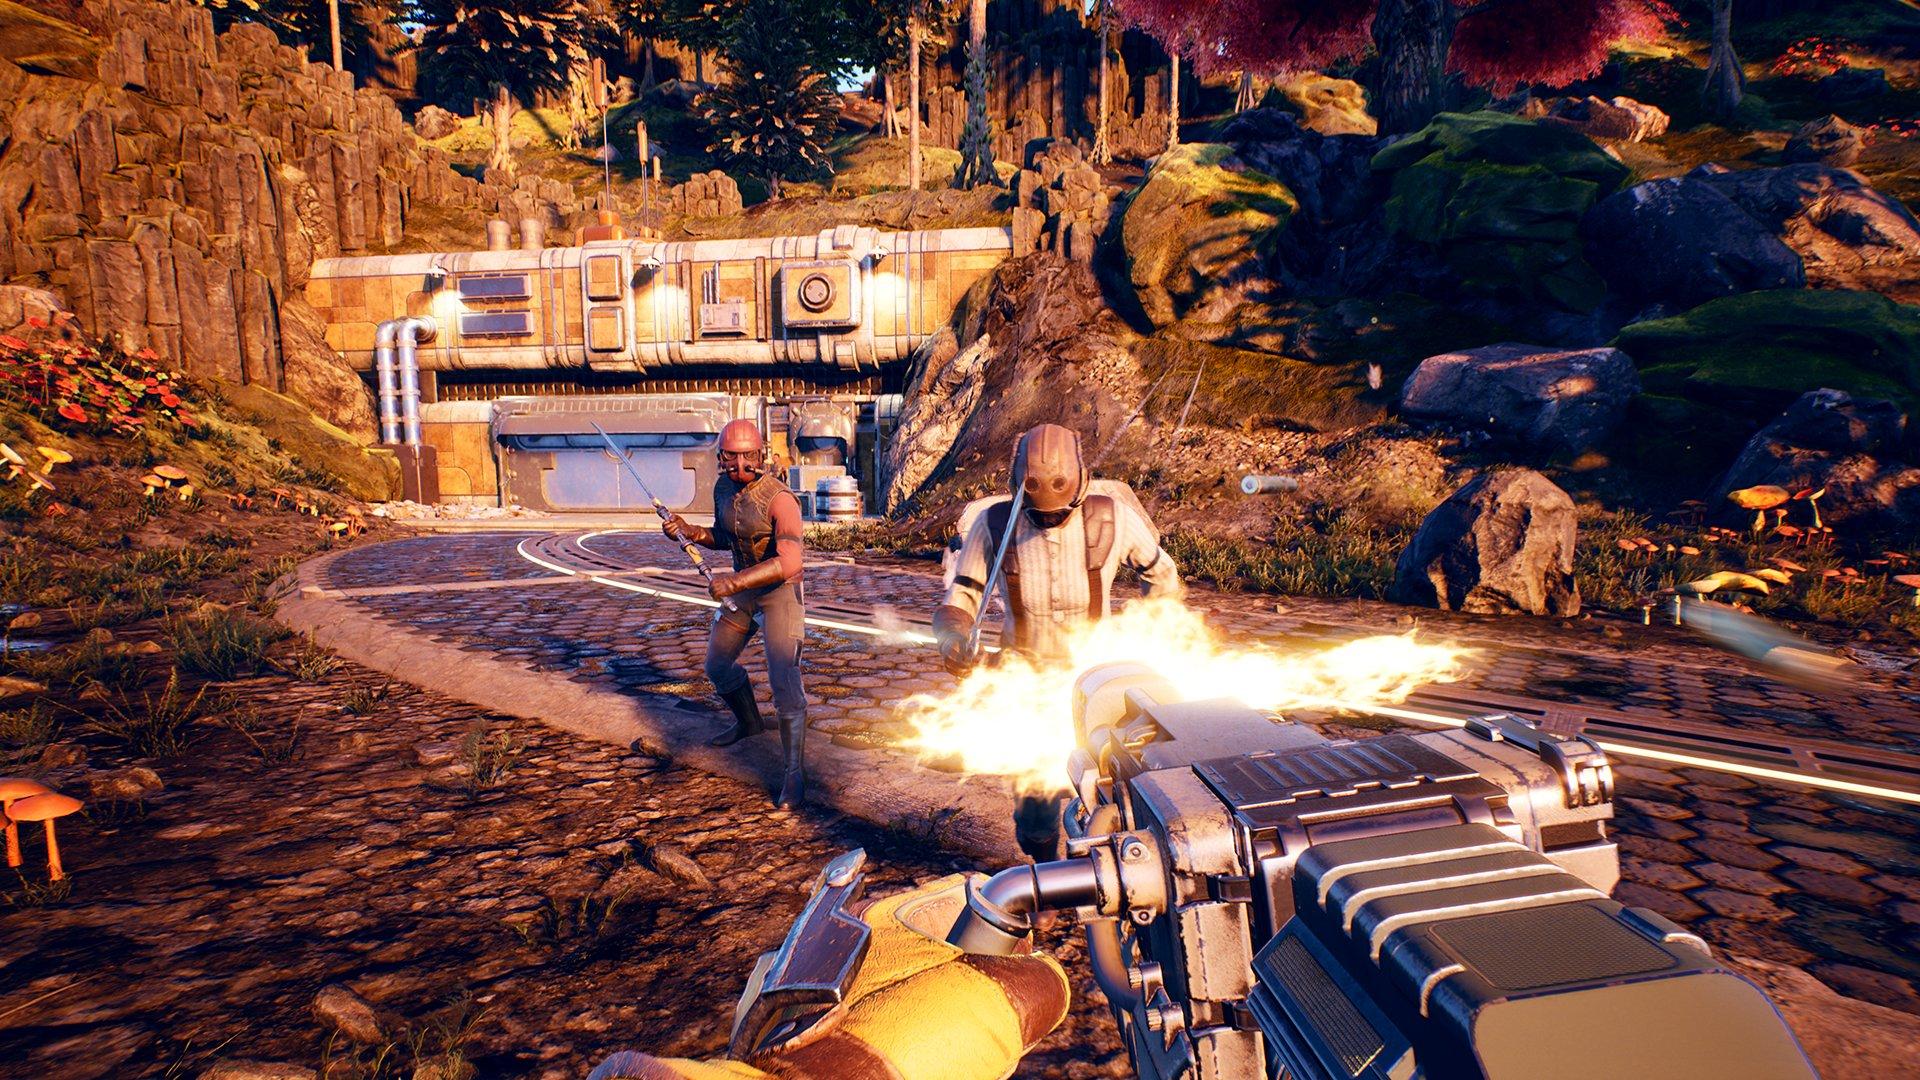 outer worlds price ps4